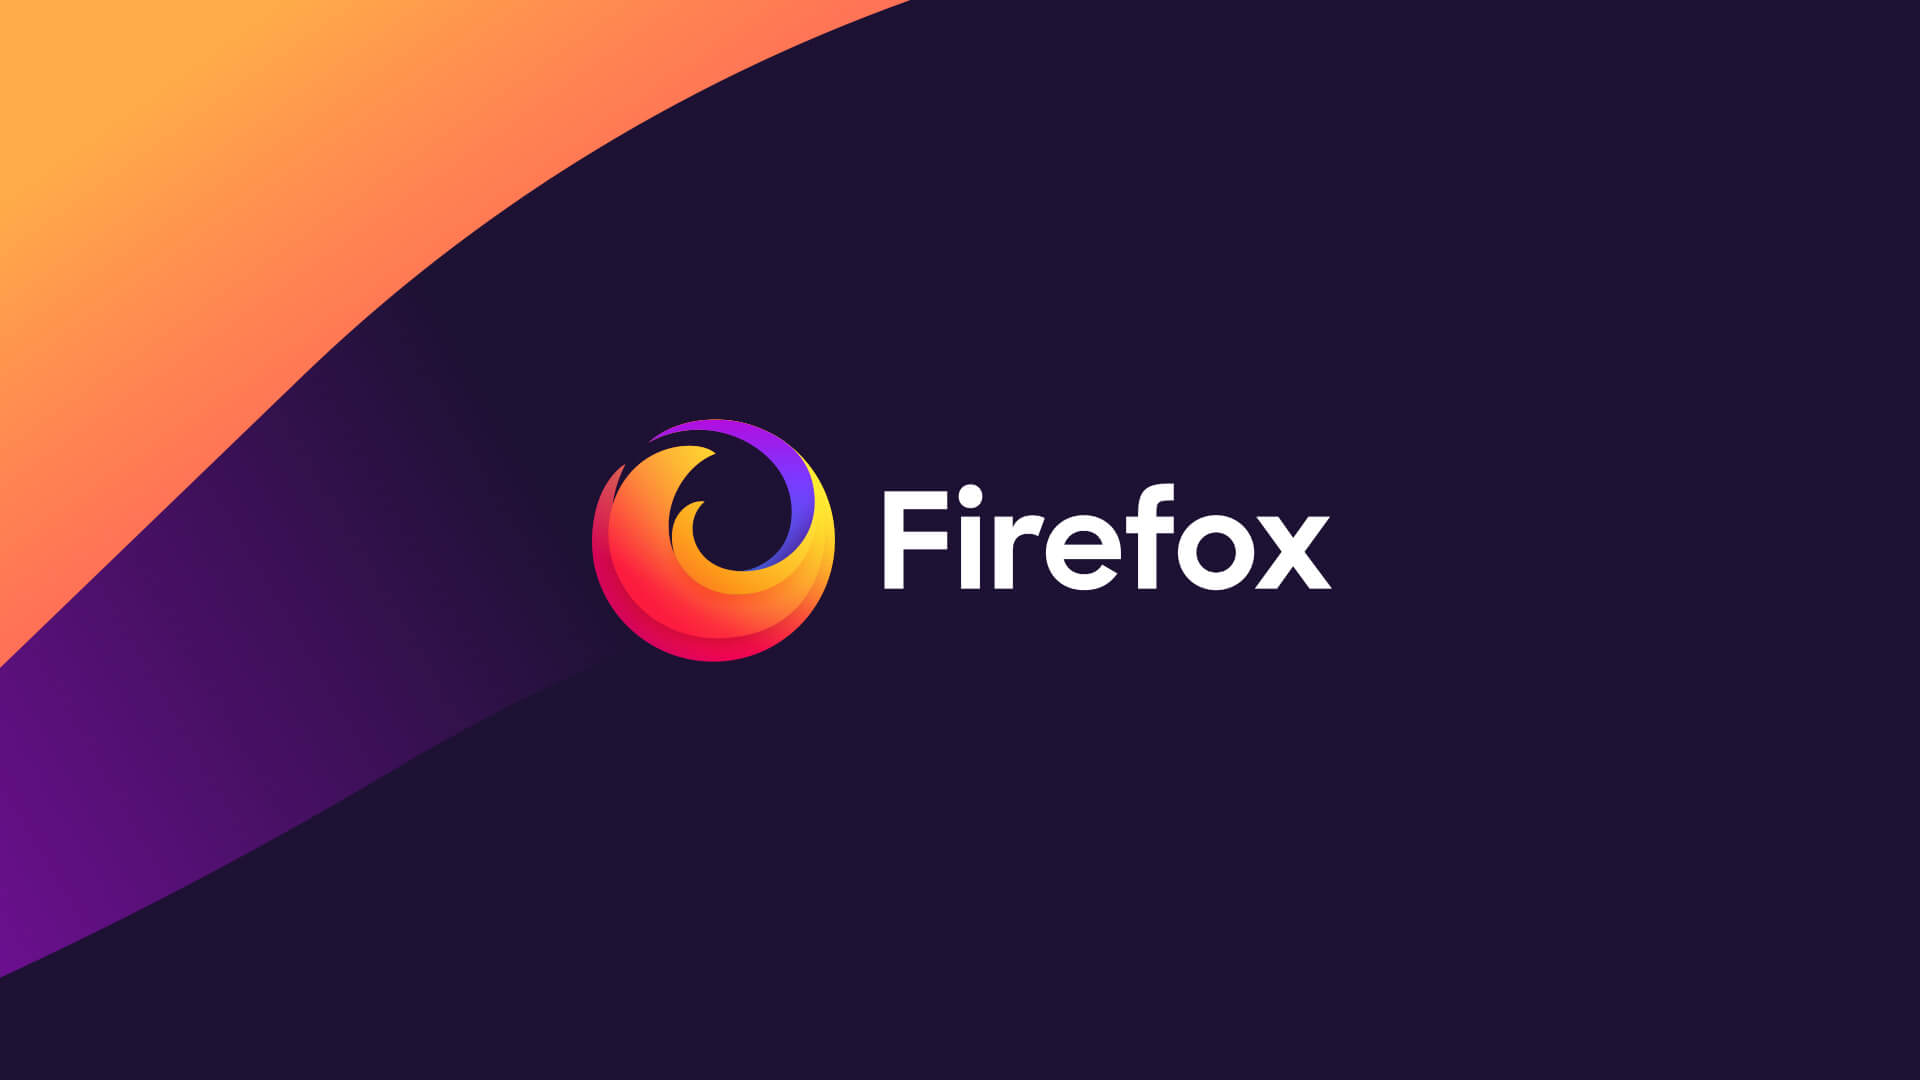 mozilla firefox download for windows